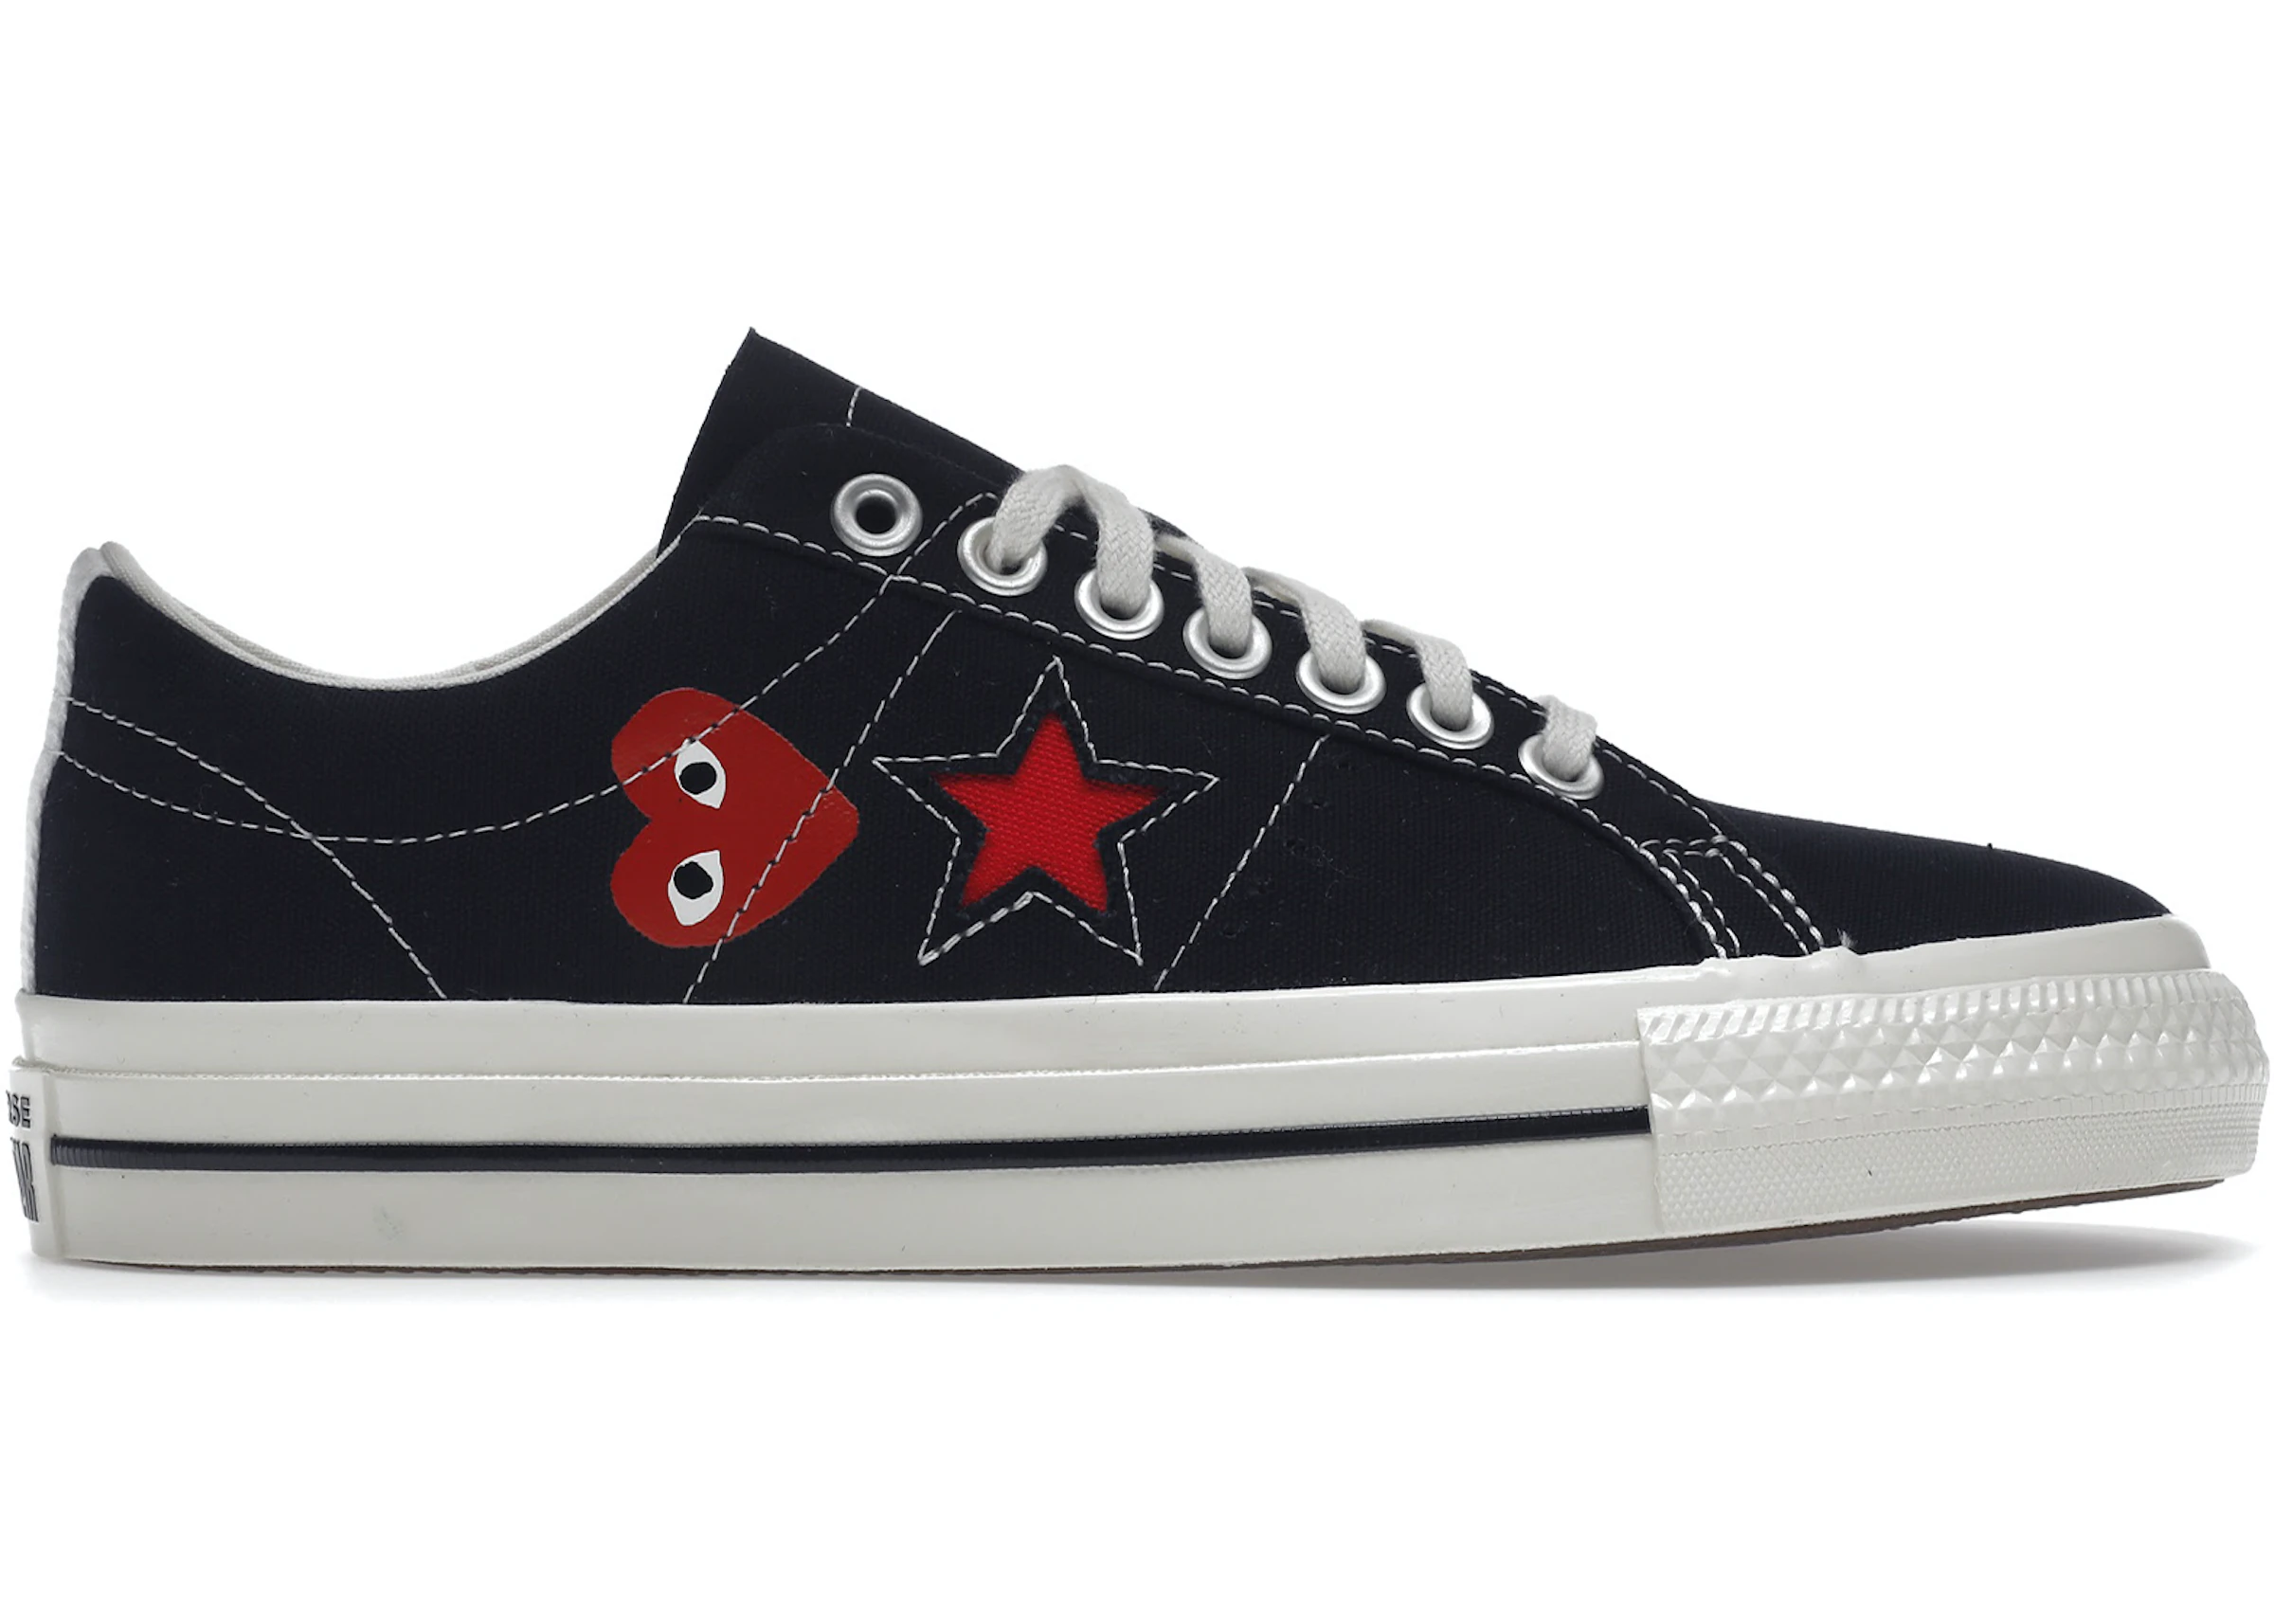 Elegance Influential Incompatible Buy Converse One Star Shoes & New Sneakers - StockX